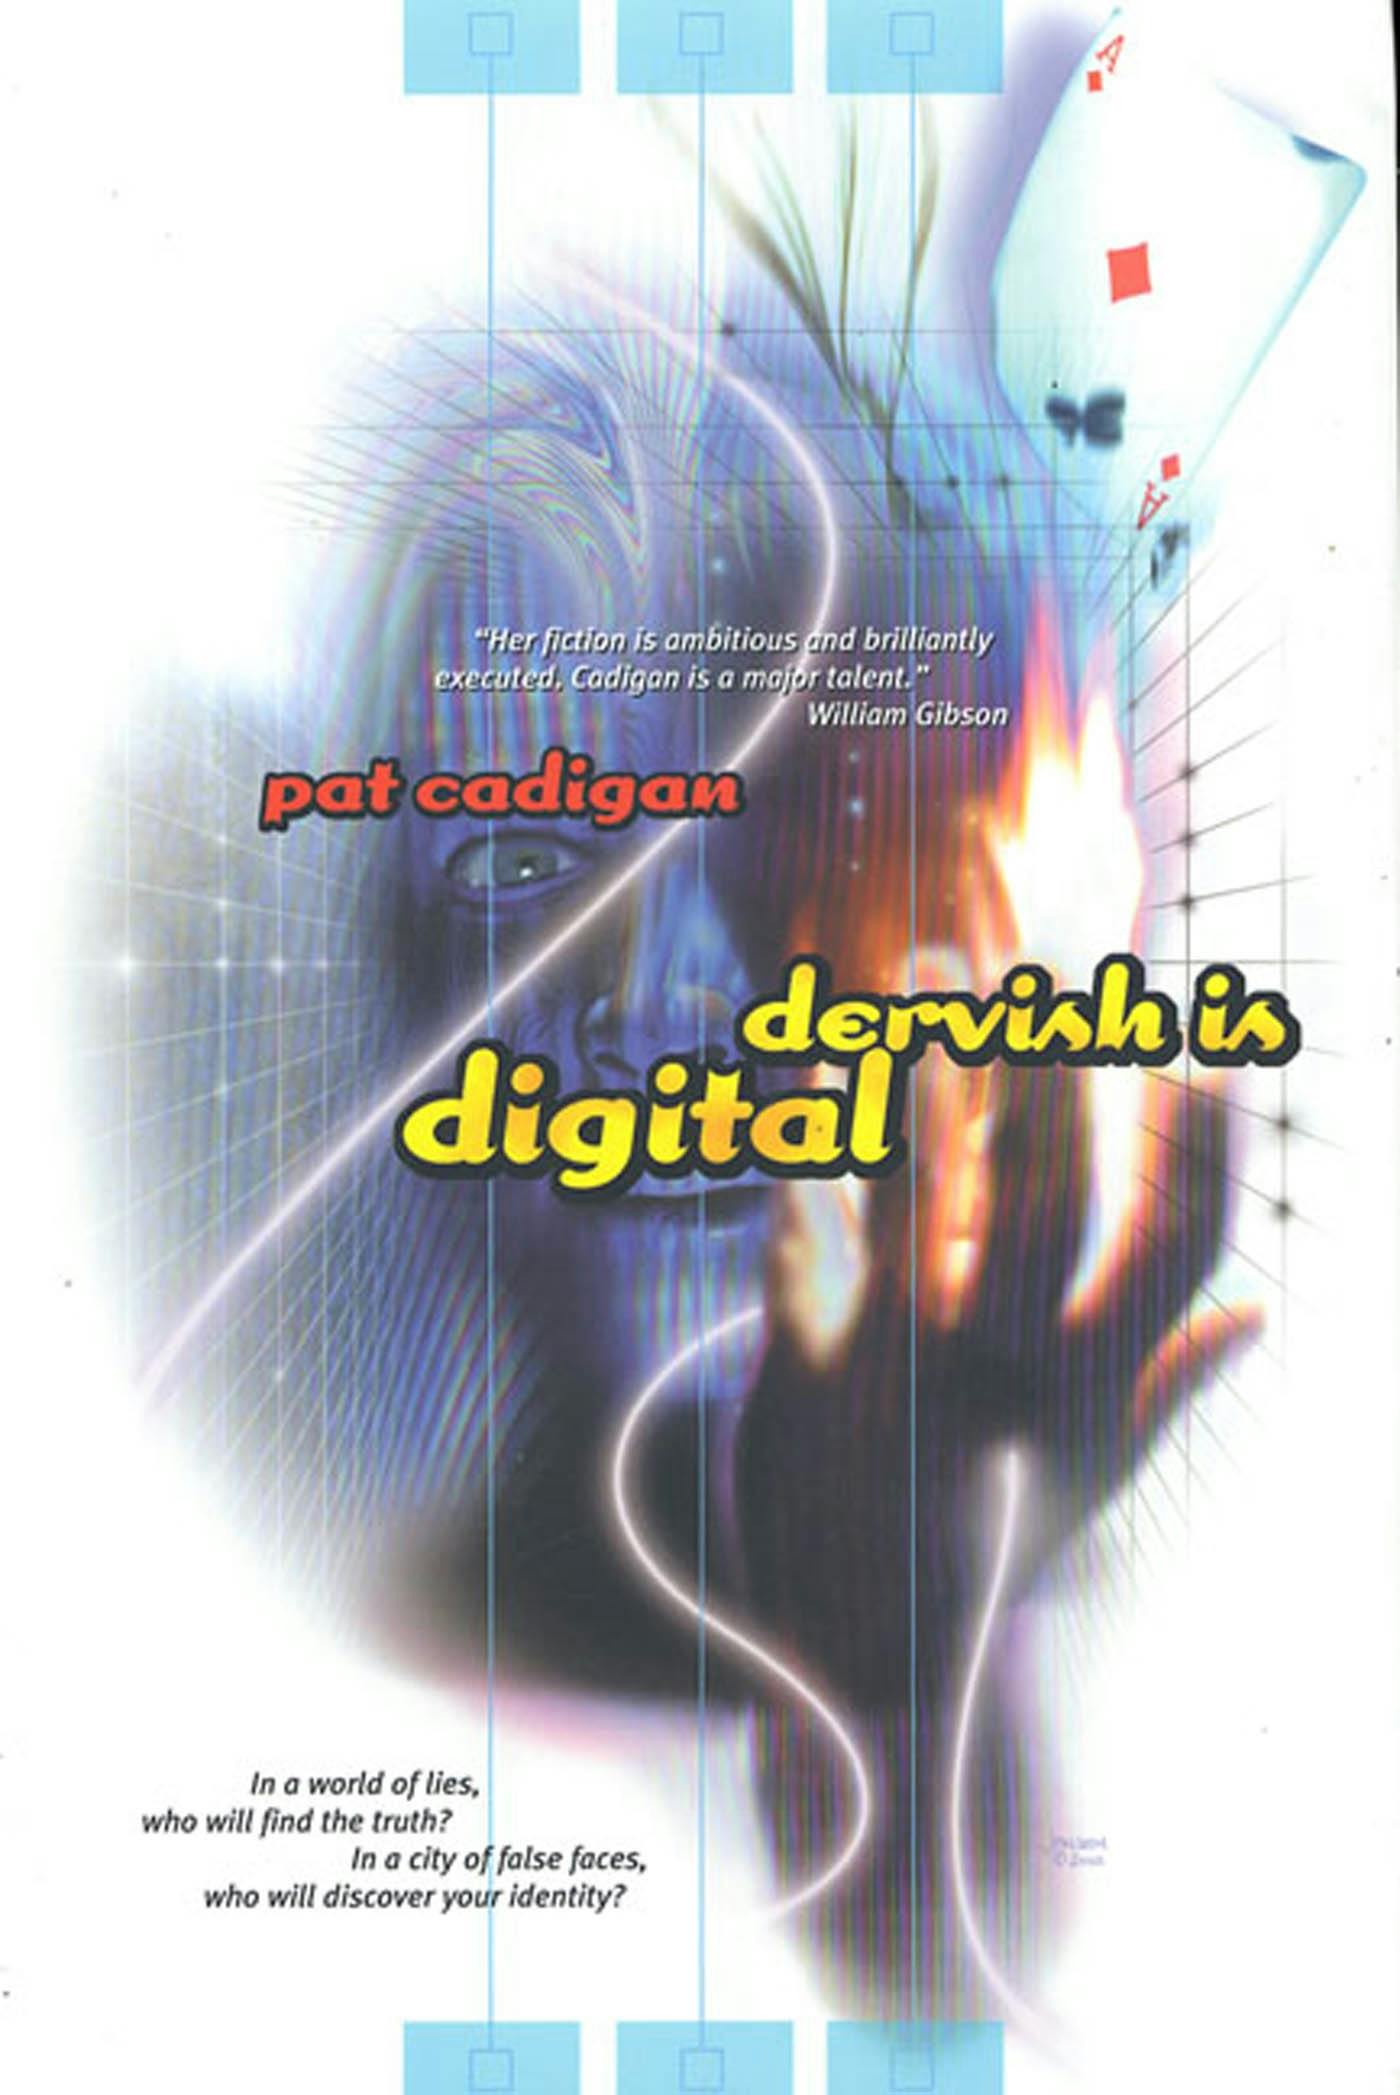 Cover for the book titled as: Dervish Is Digital